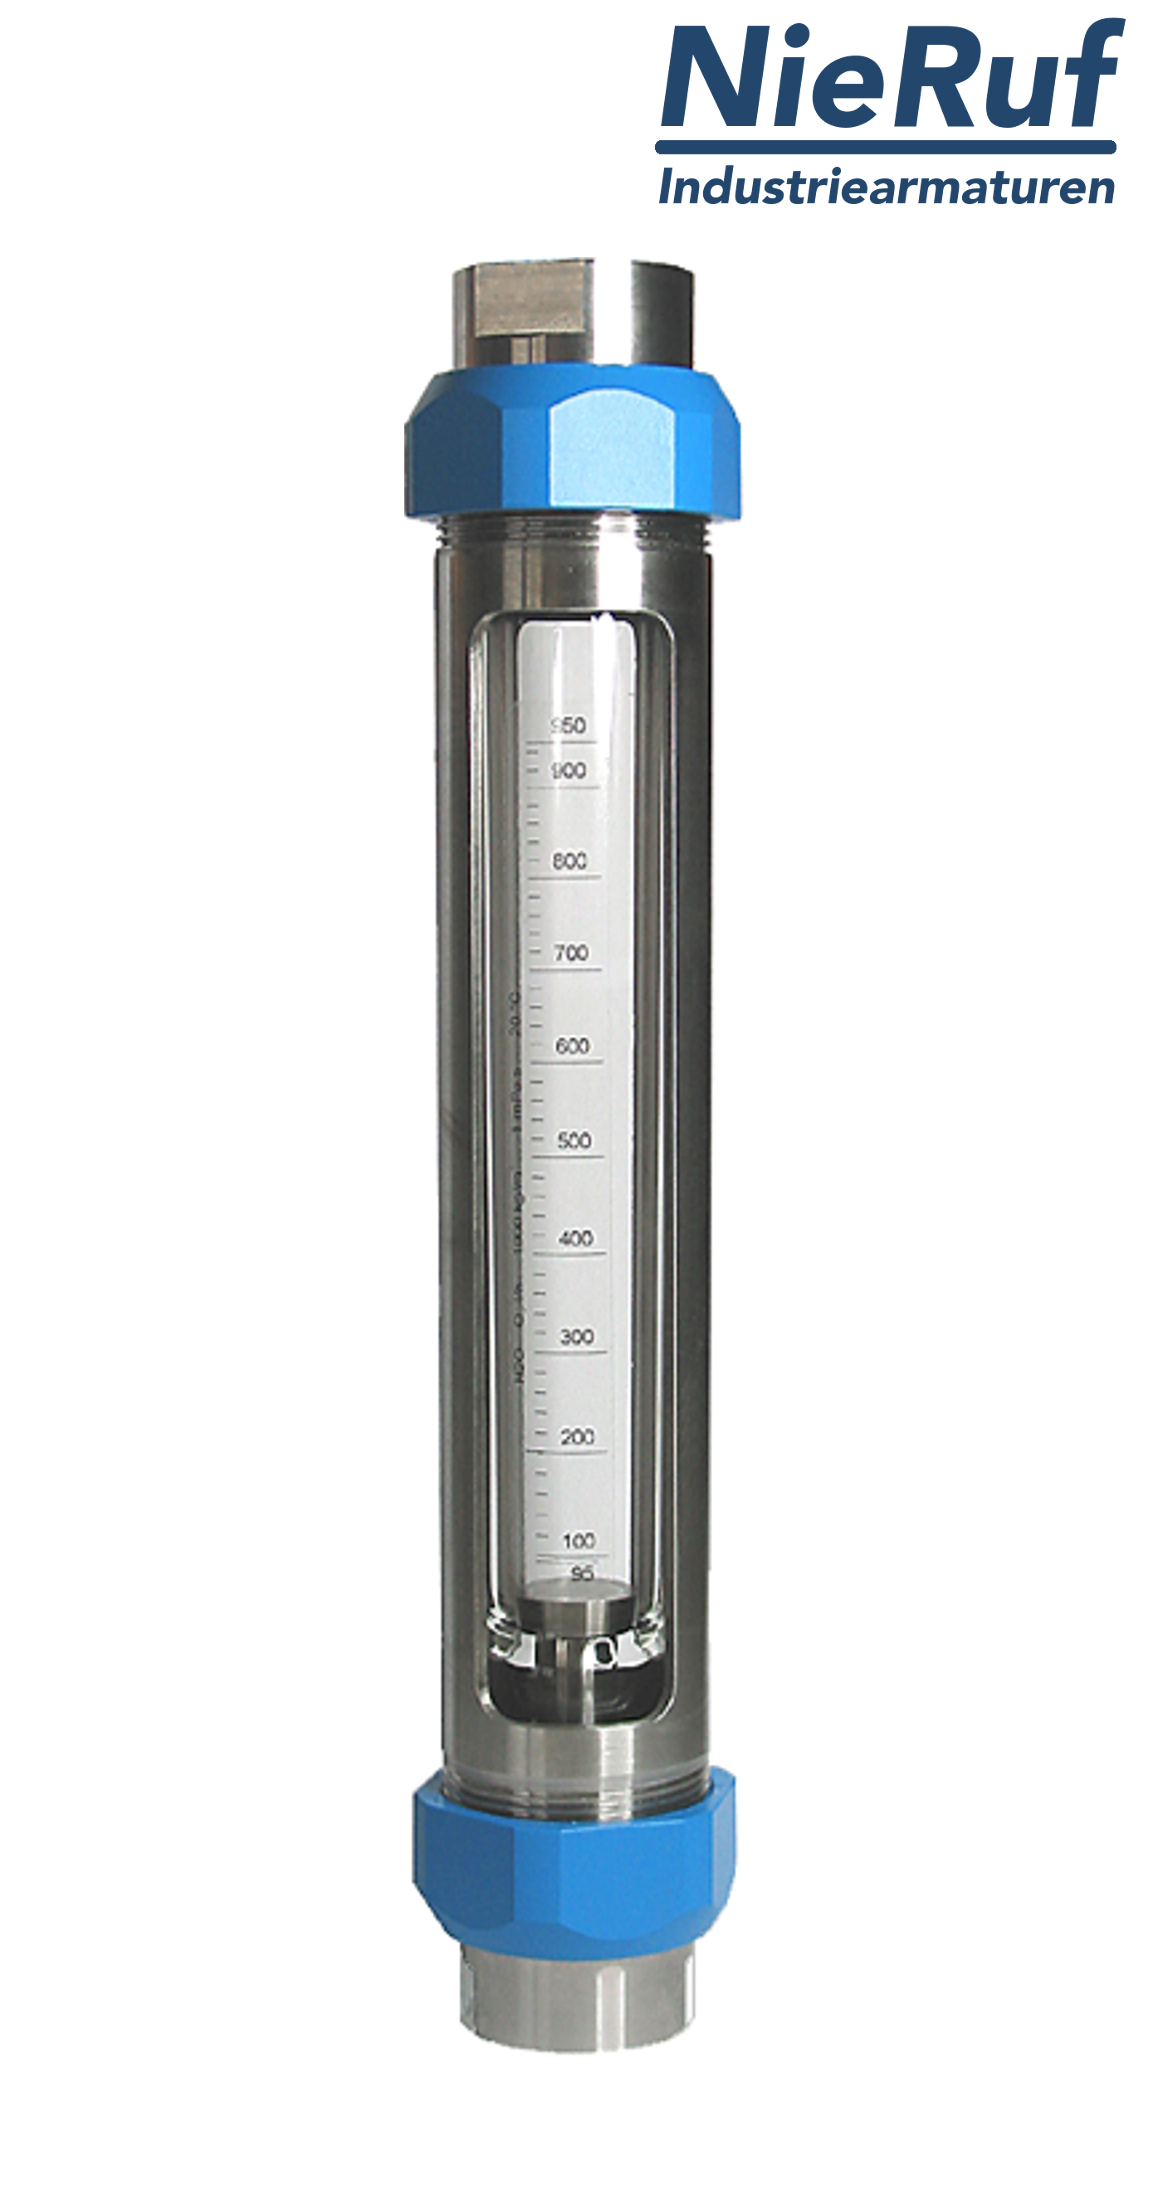 Variable area flowmeter stainless steel + borosilicate 1/2" inch 300.0 - 3000 l/h water EPDM